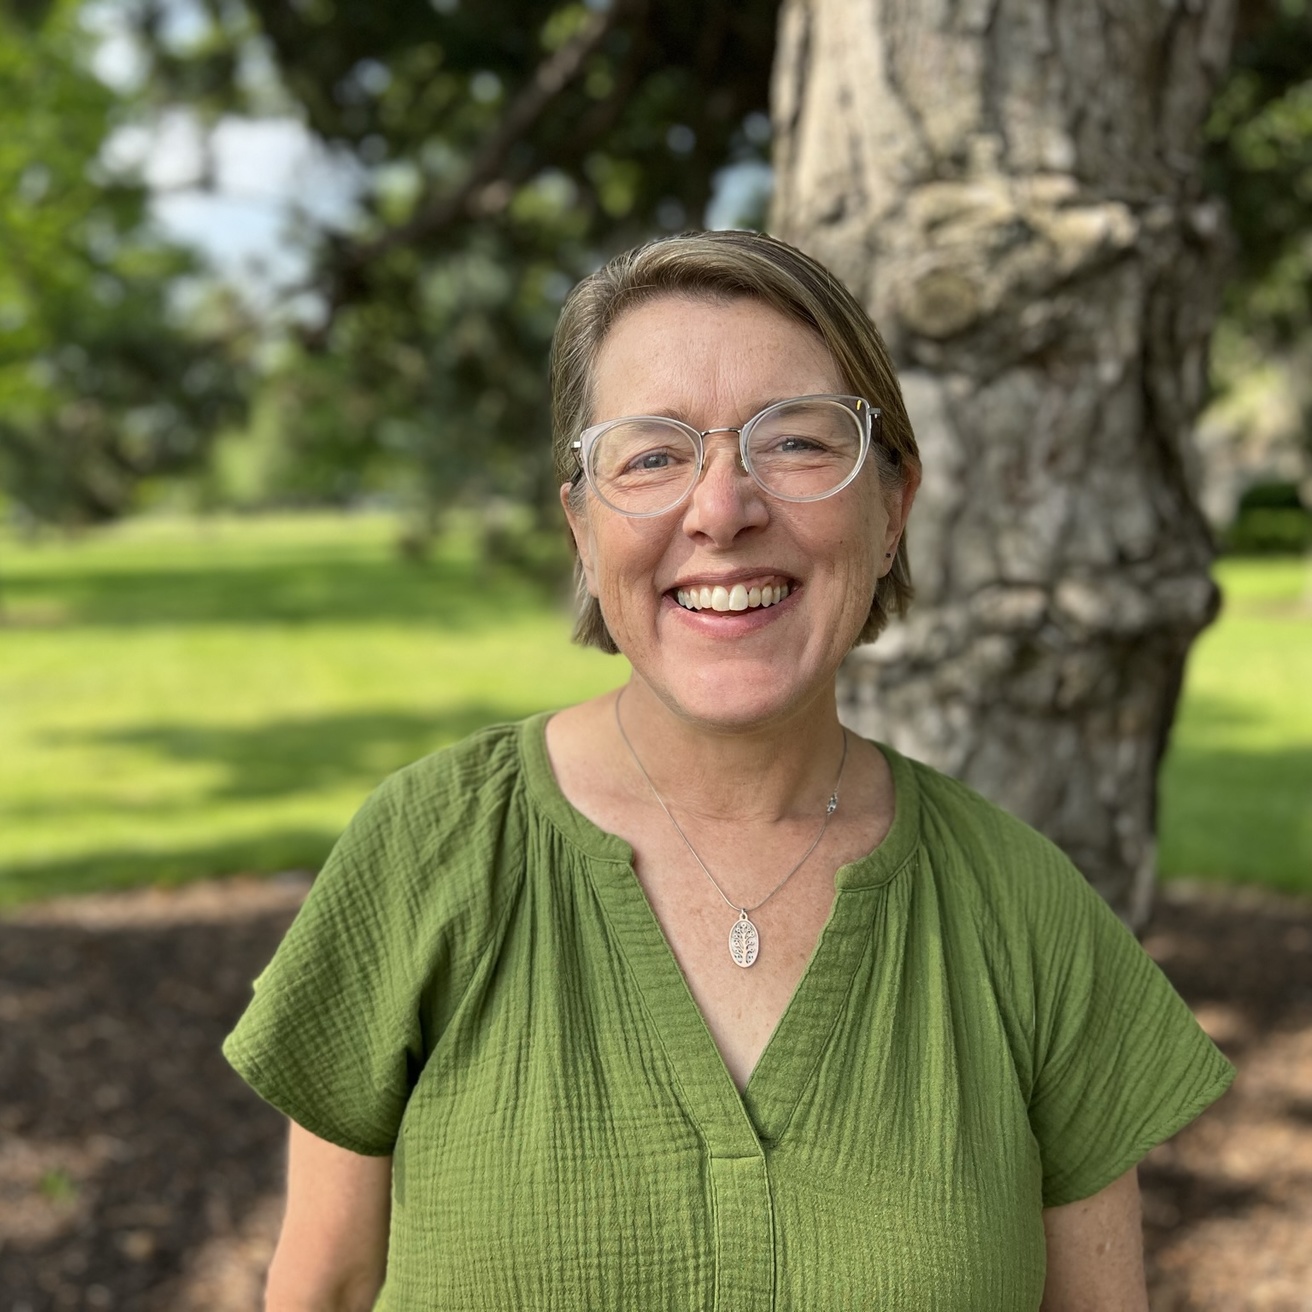 Portrait of a woman in a green shirt with clear-framed glasses smiling in front of a tree.